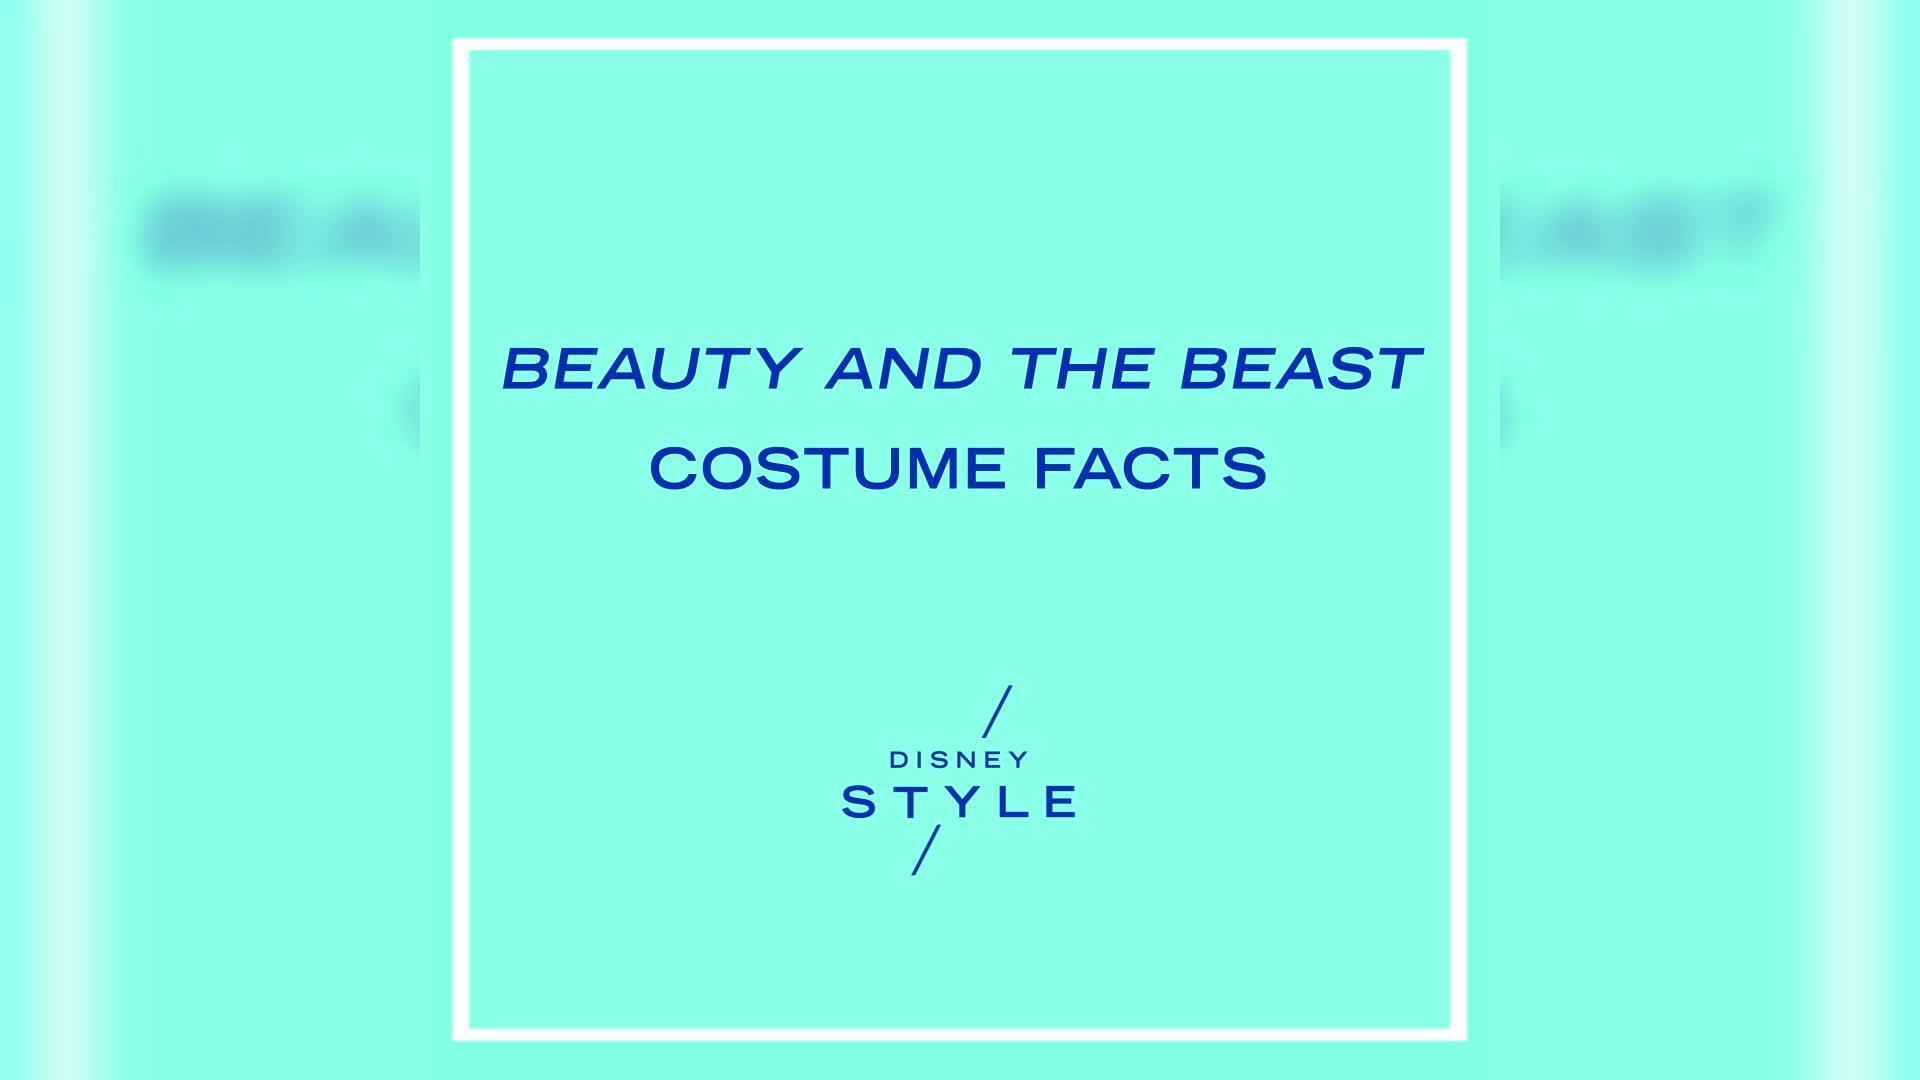 Beauty and the Beast Costume Facts